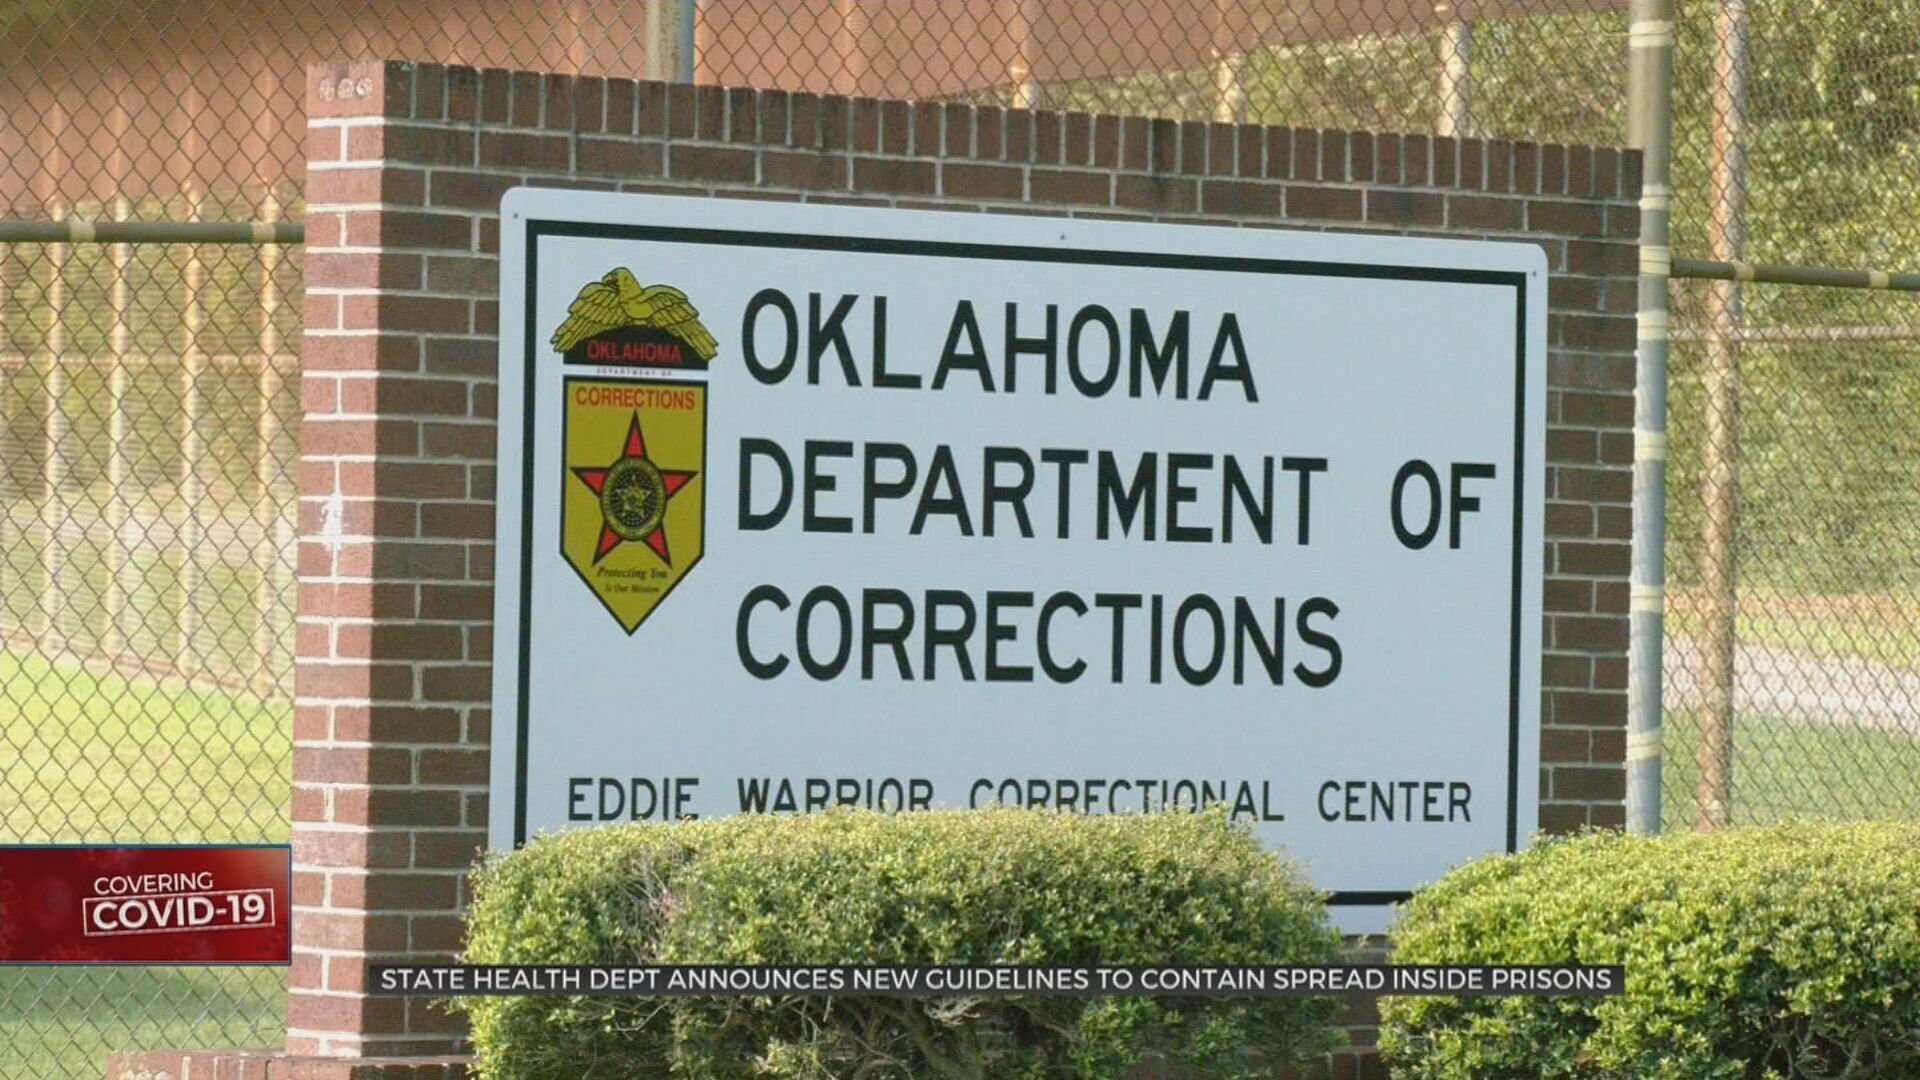 State Health Dept Announces New Guidelines To Contain COVID-19 In Prisons 